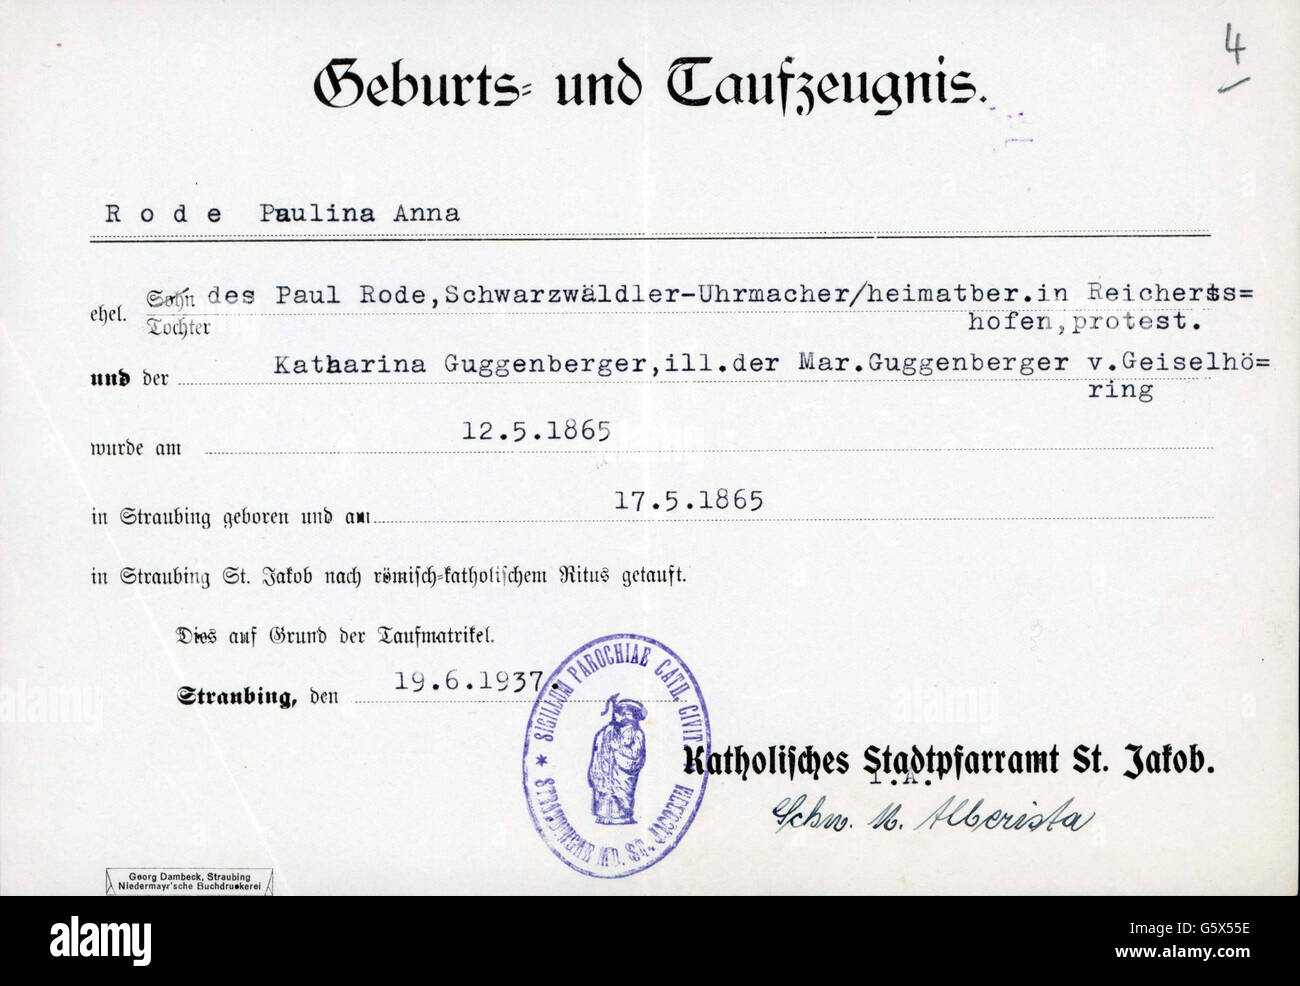 documents,certificate of birth and baptism for Paulina Anna Rode,born on 12.5.1865,issiued by Catholic City Rectory of St. Jakob,Straubing,19.6.1937,19th century,20th century,1930s,30s,Germany,Lower Bavaria,religion,religions,Christianity,Catholicism,birth,births,birth certificate,birth certificates,christening,certificate of baptism,certificates of baptism,register,registers,stamp,stamps,signature,signatures,German Reich,Third Reich,Aryan certificate,documents,document,city rectory,city rectories,historic,historical,Additional-Rights-Clearences-Not Available Stock Photo